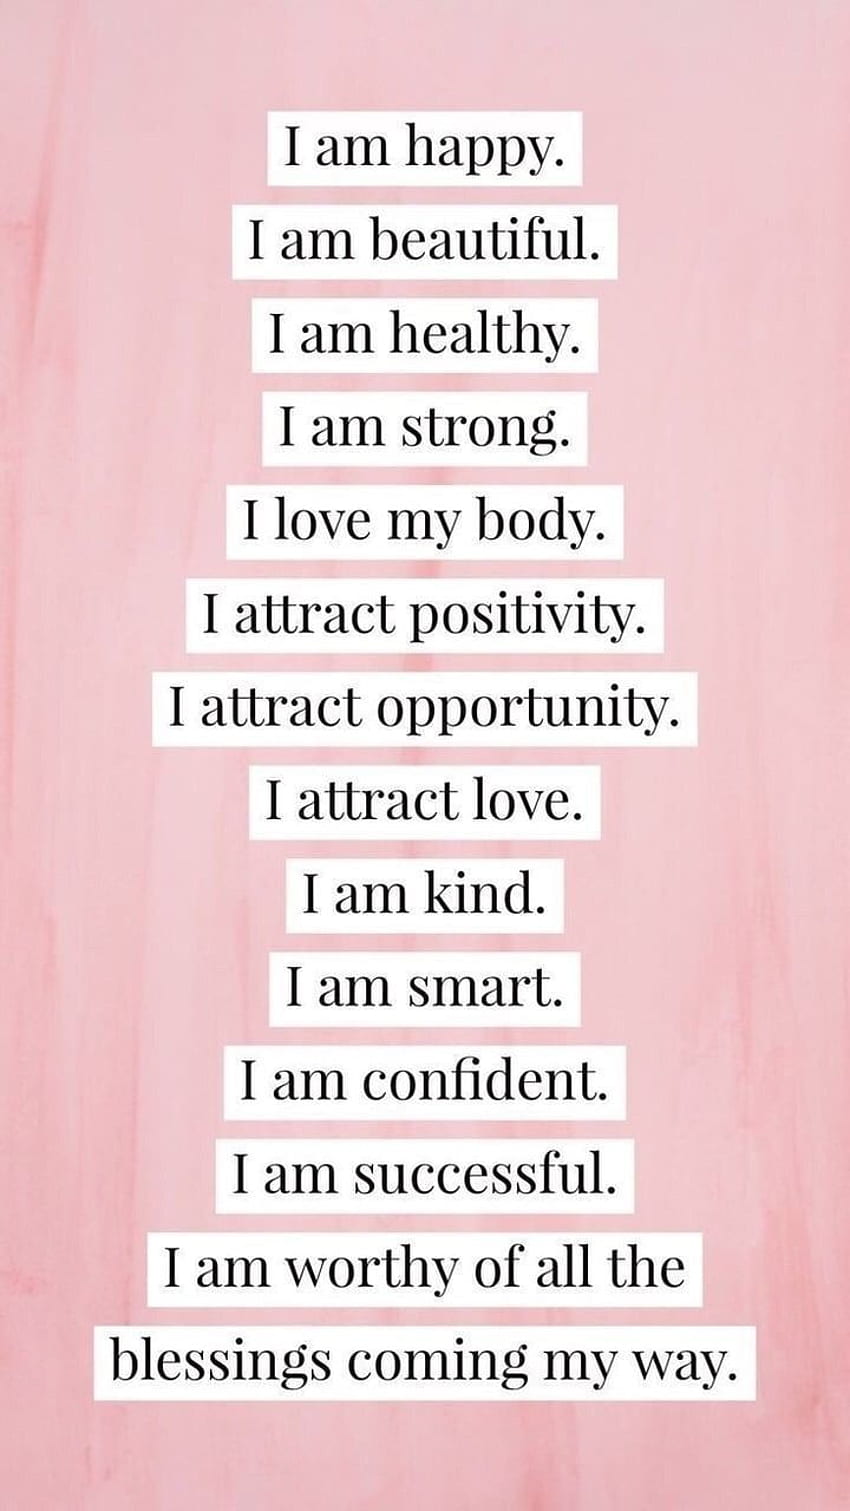 Start Your Day With Positivity 15 Affirmation Wallpapers For IPhone